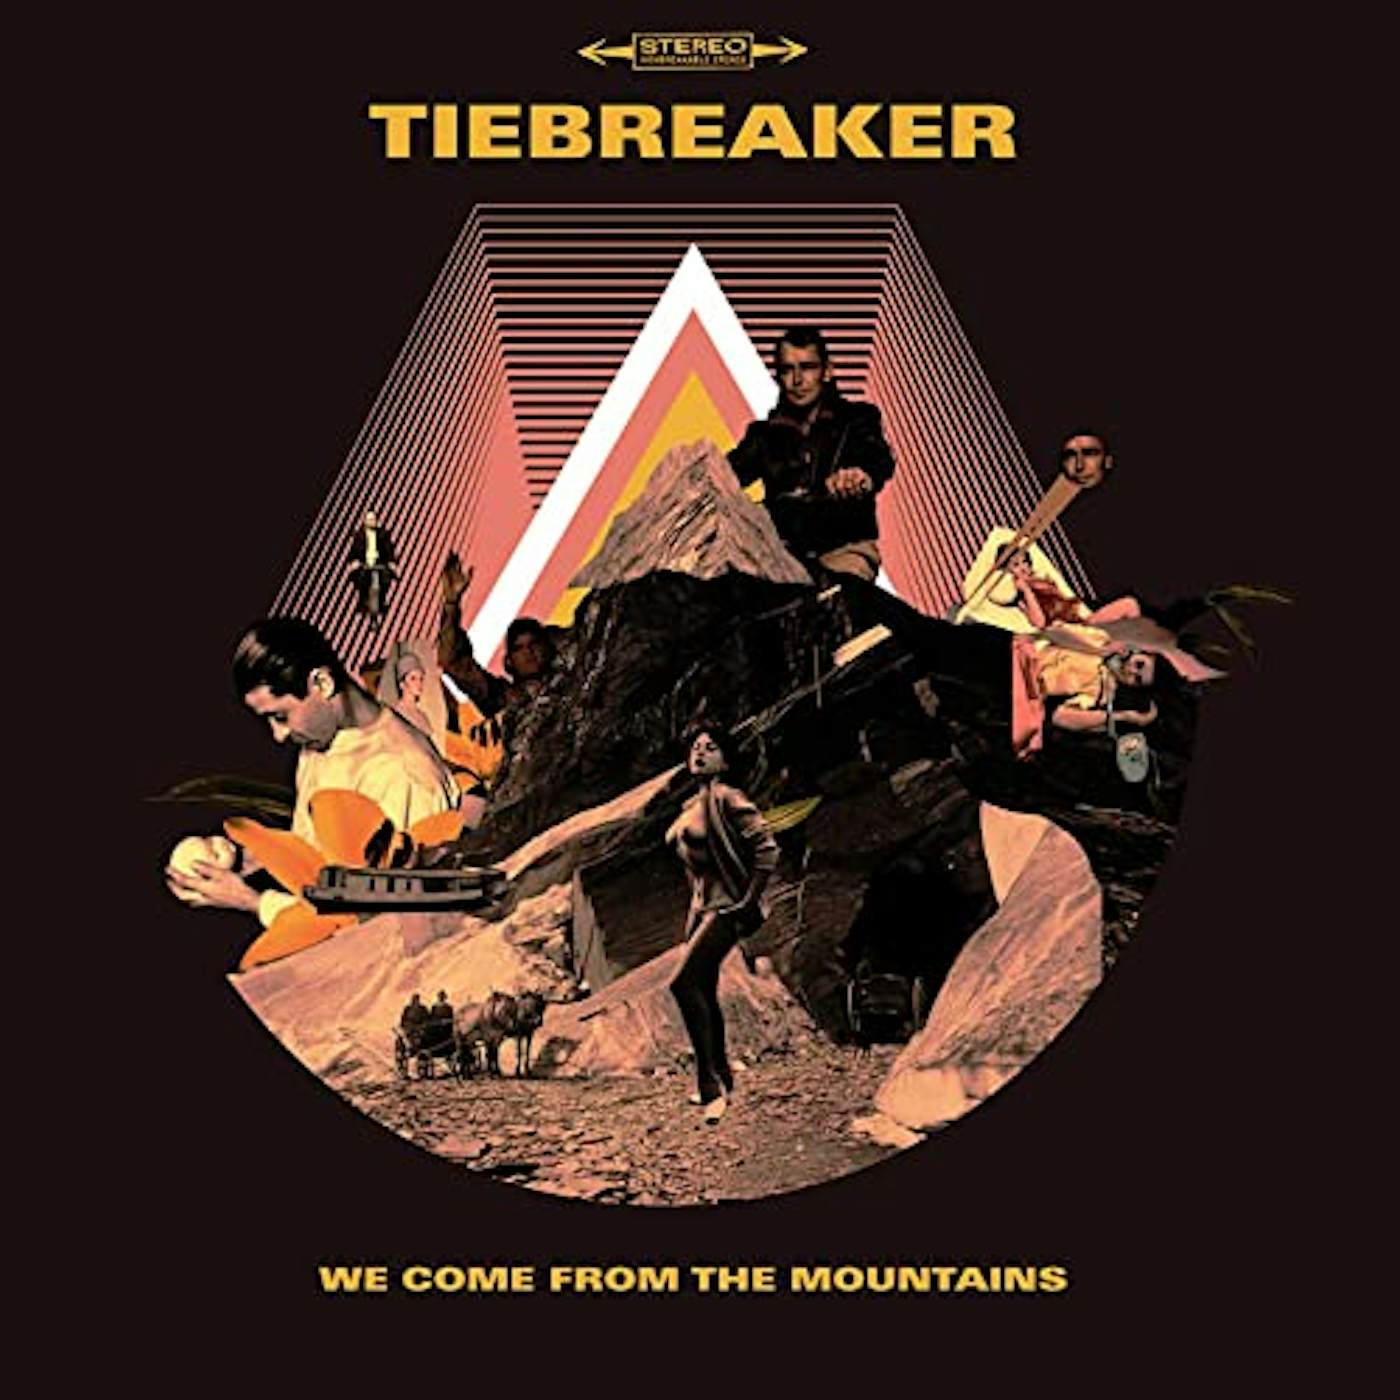 Tiebreaker We come from the mountains Vinyl Record